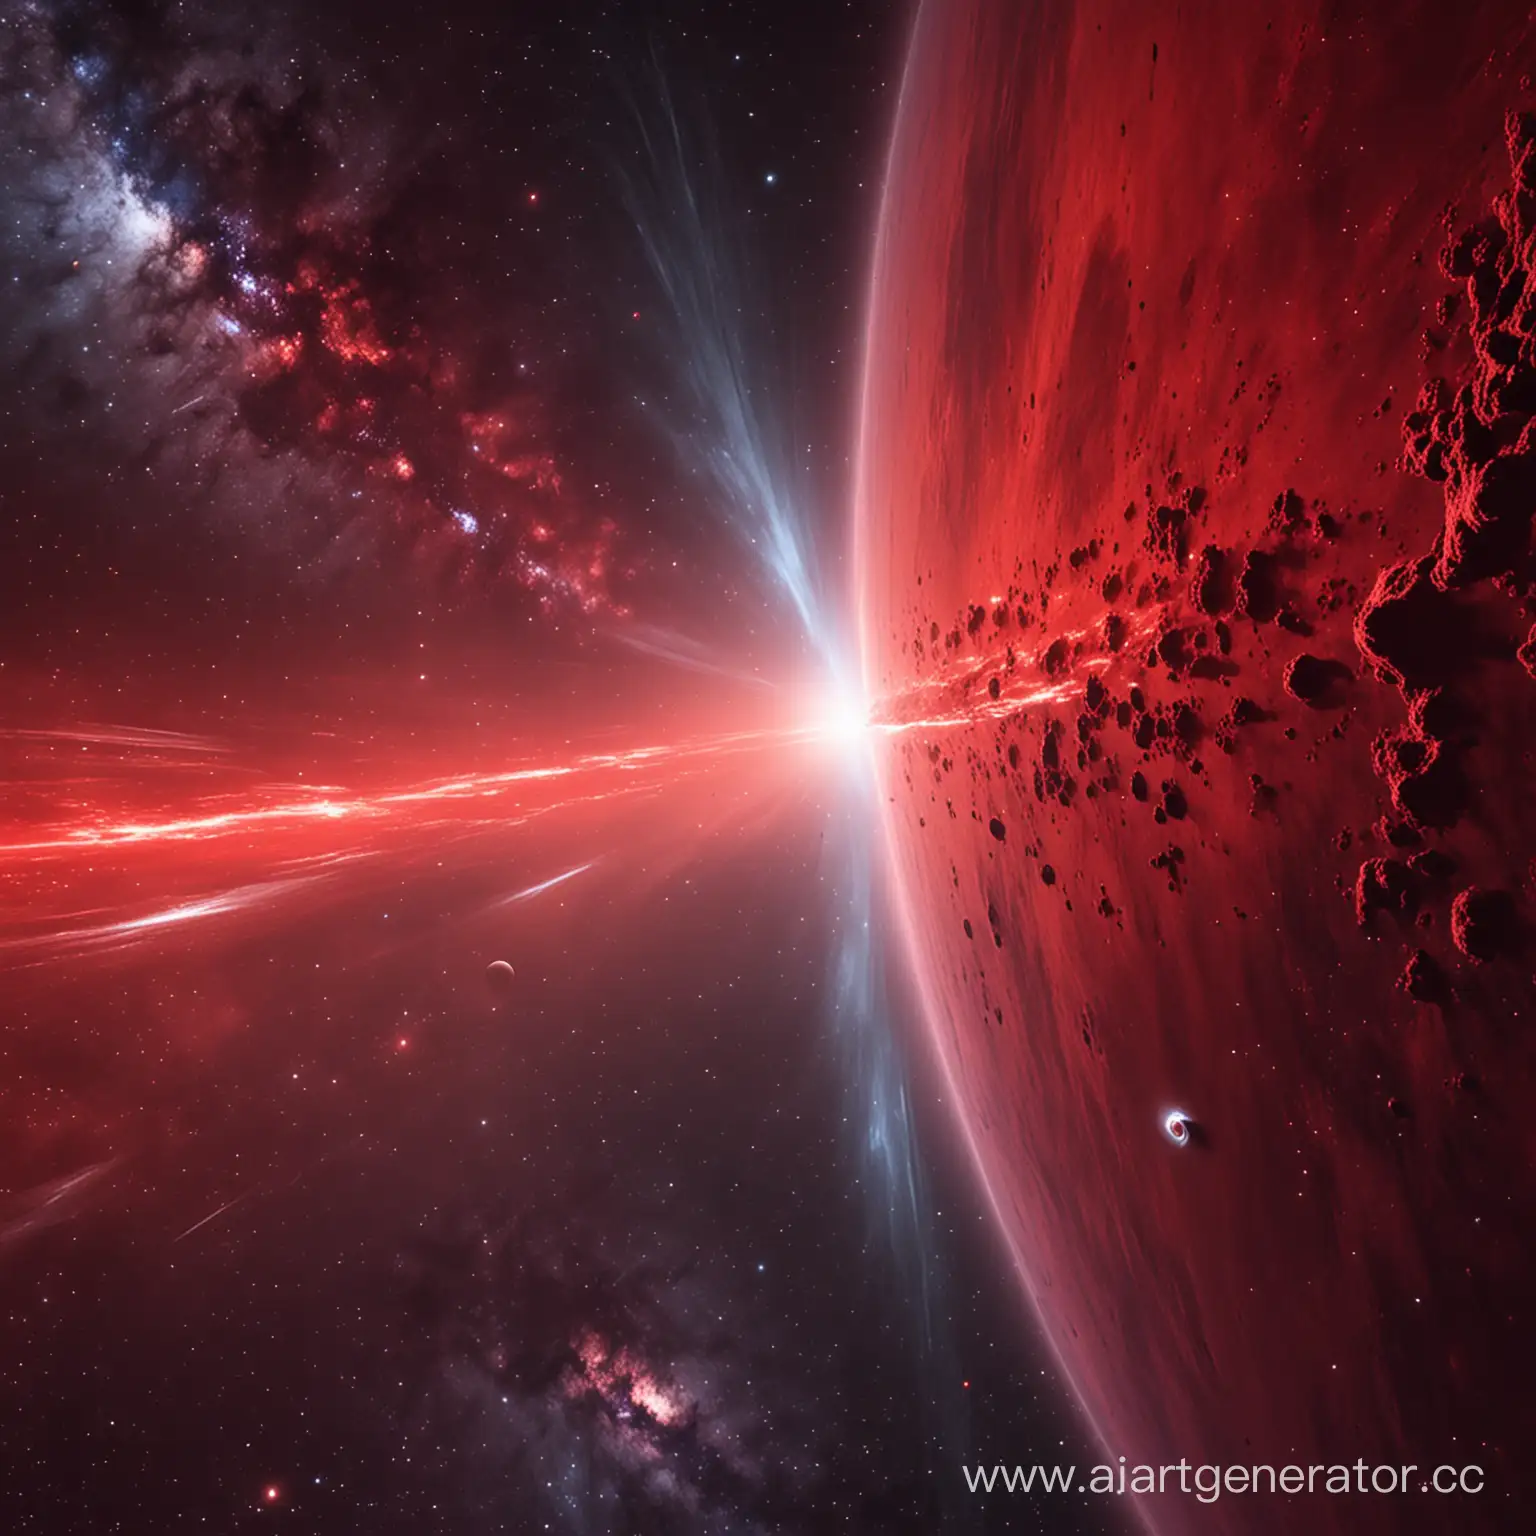 Vibrant-Red-Space-Nebula-Exploration-Galactic-Beauty-in-Cosmic-Red-Hues